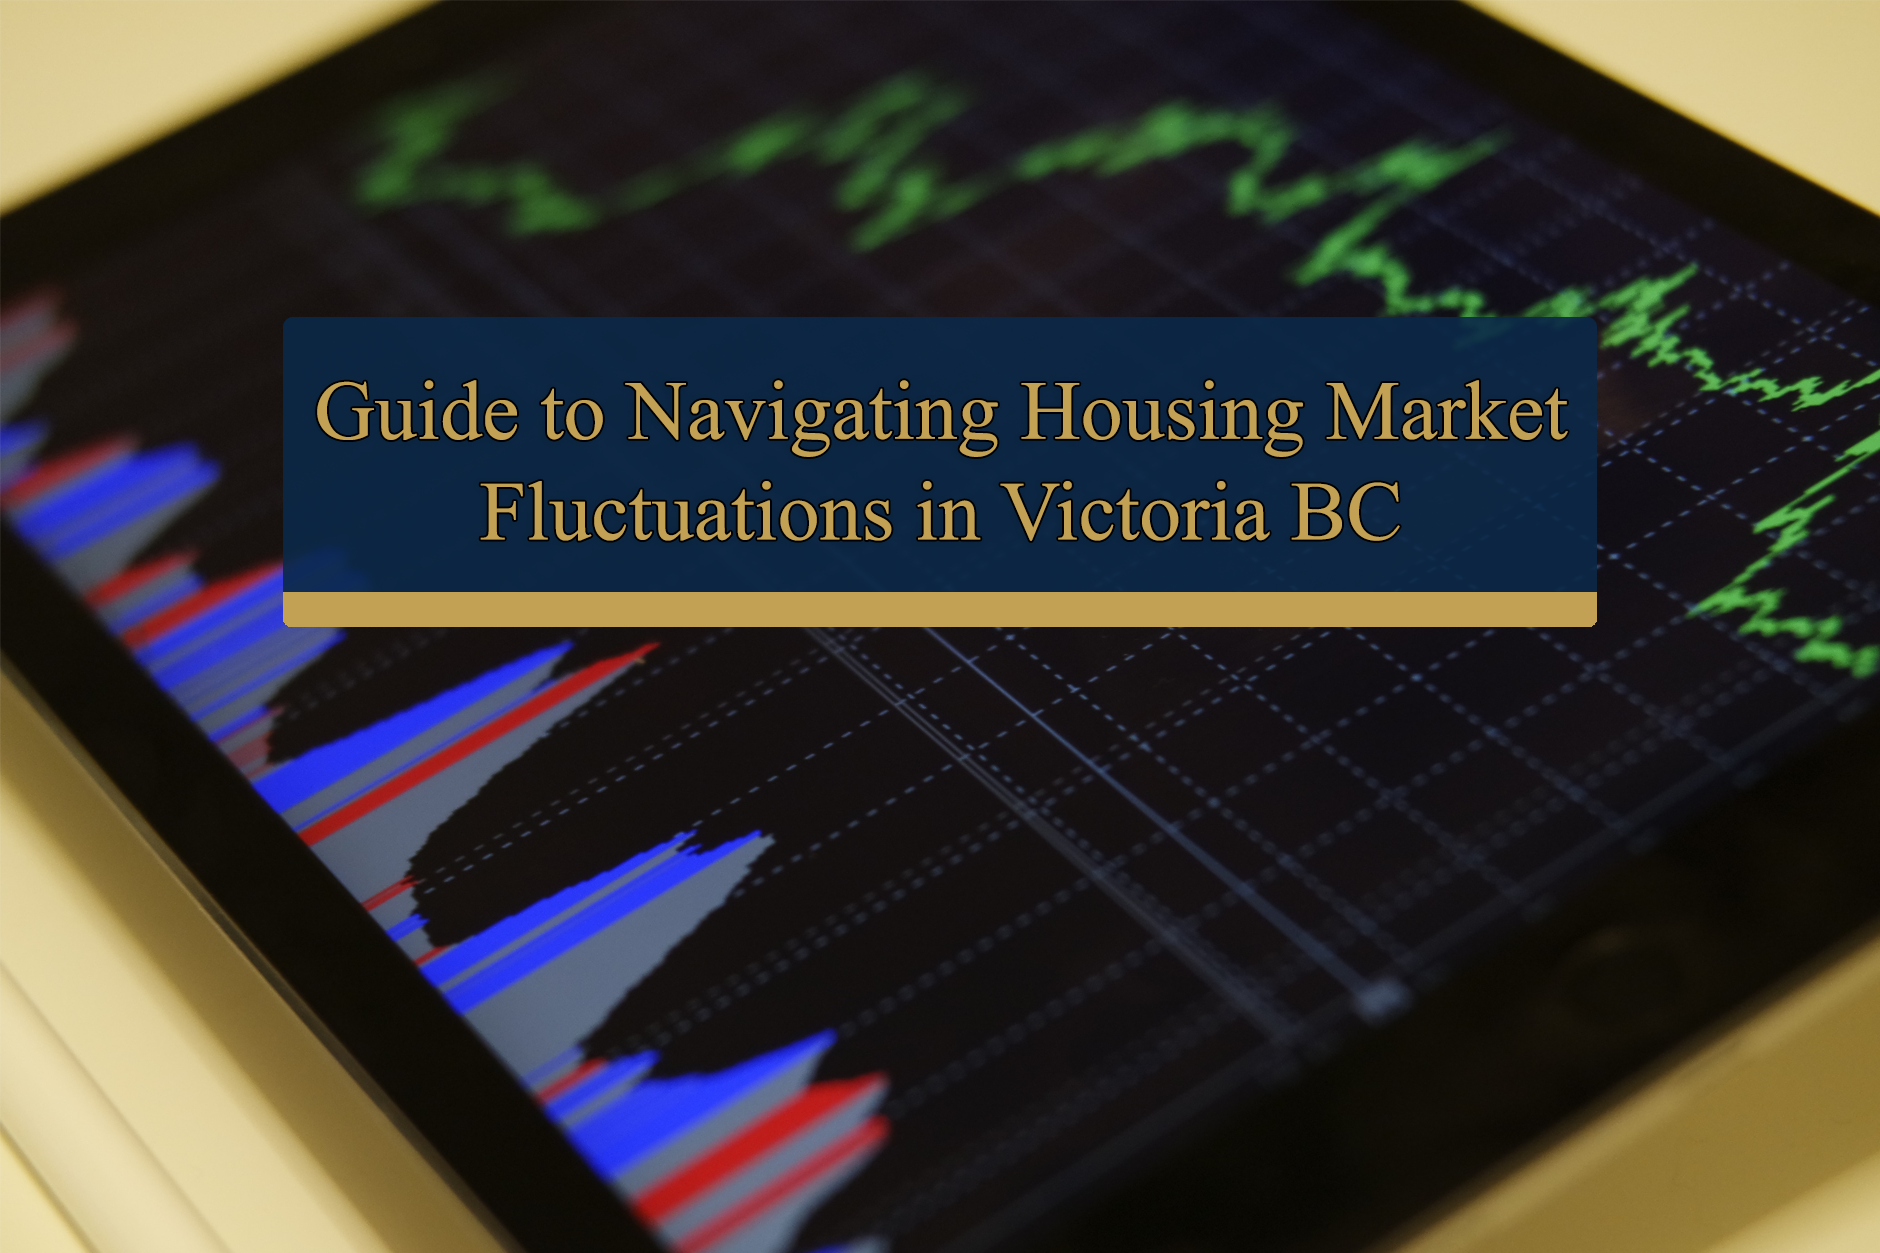 Guide to Navigating Housing Market Fluctuations